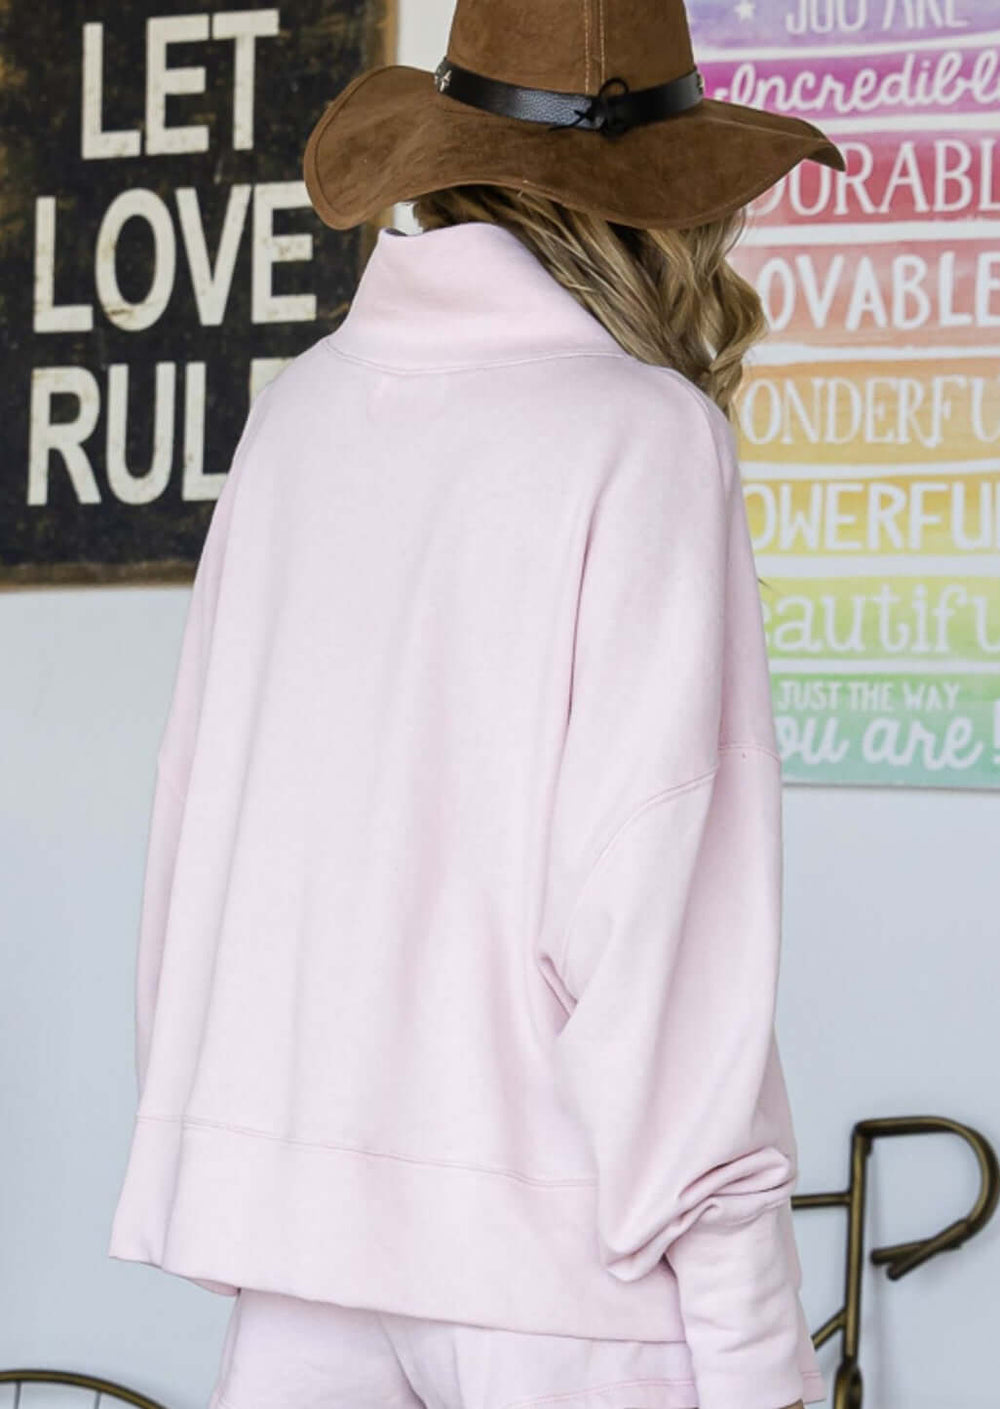 Bucket List Style# T1752 | Ladies Soft & Comfortable Baby Pink Mock Turtle Neck Cotton Dolman Sleeve Sweatshirt | Made in USA | Classy Cozy Cool Women's Made in America Boutique